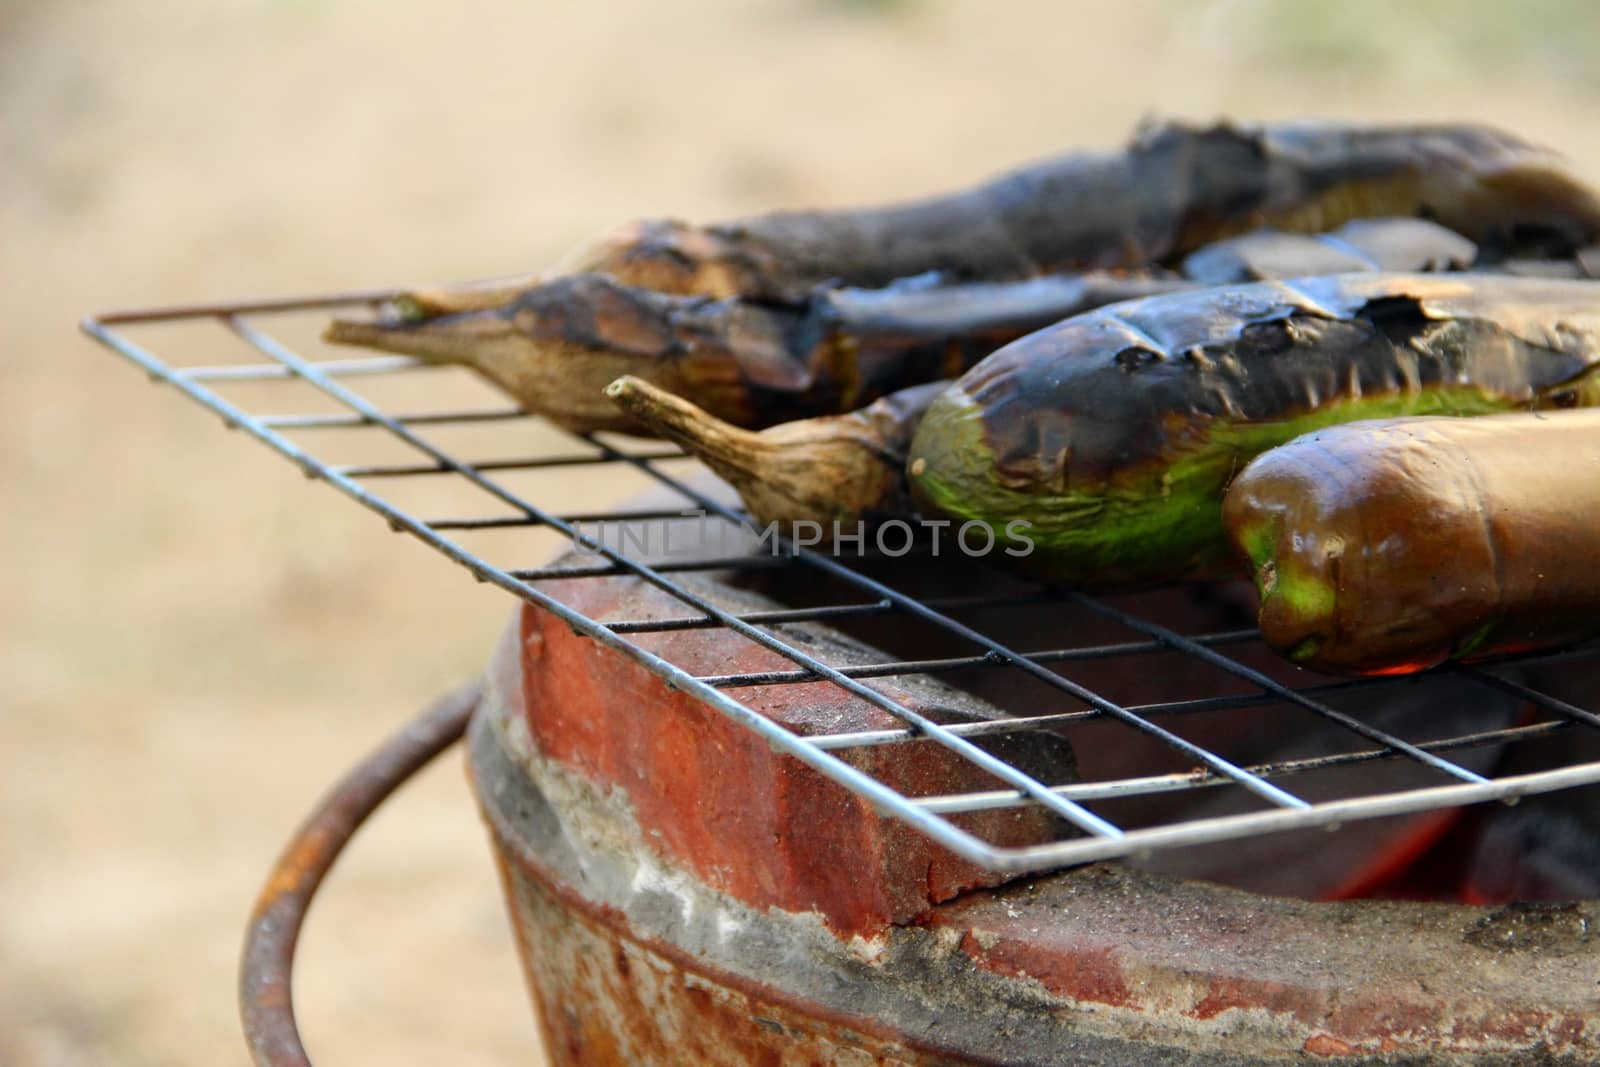 Grilling eggplants on earthen stove, old style Asian cooking